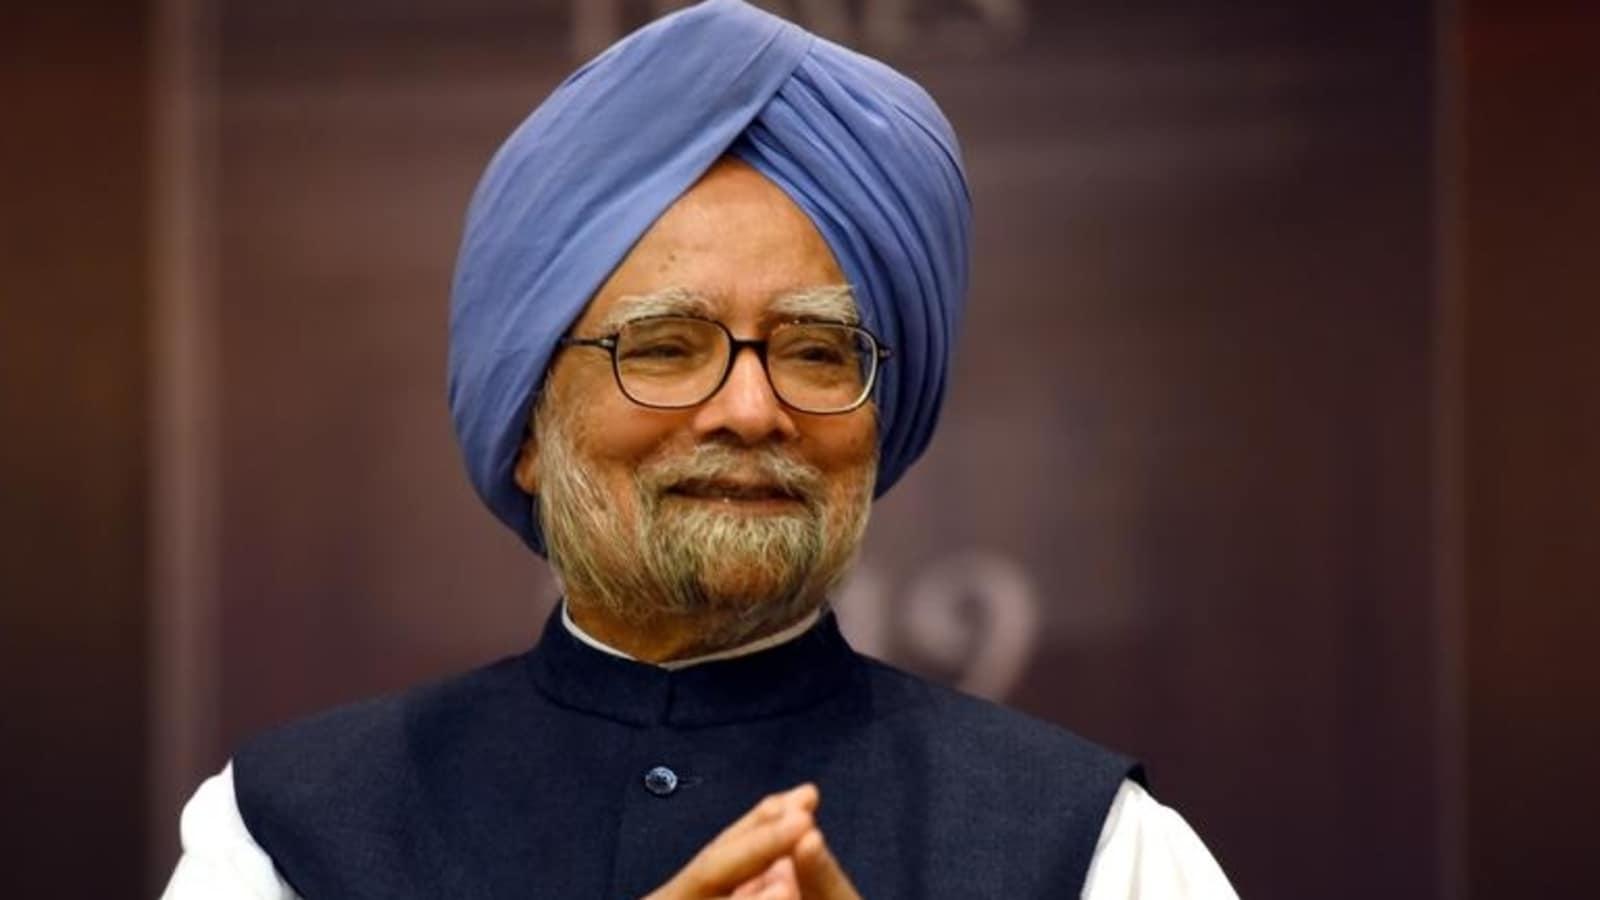 Manmohan Singh turns 89: Nation marks birthday of former prime minister |  Latest News India - Hindustan Times